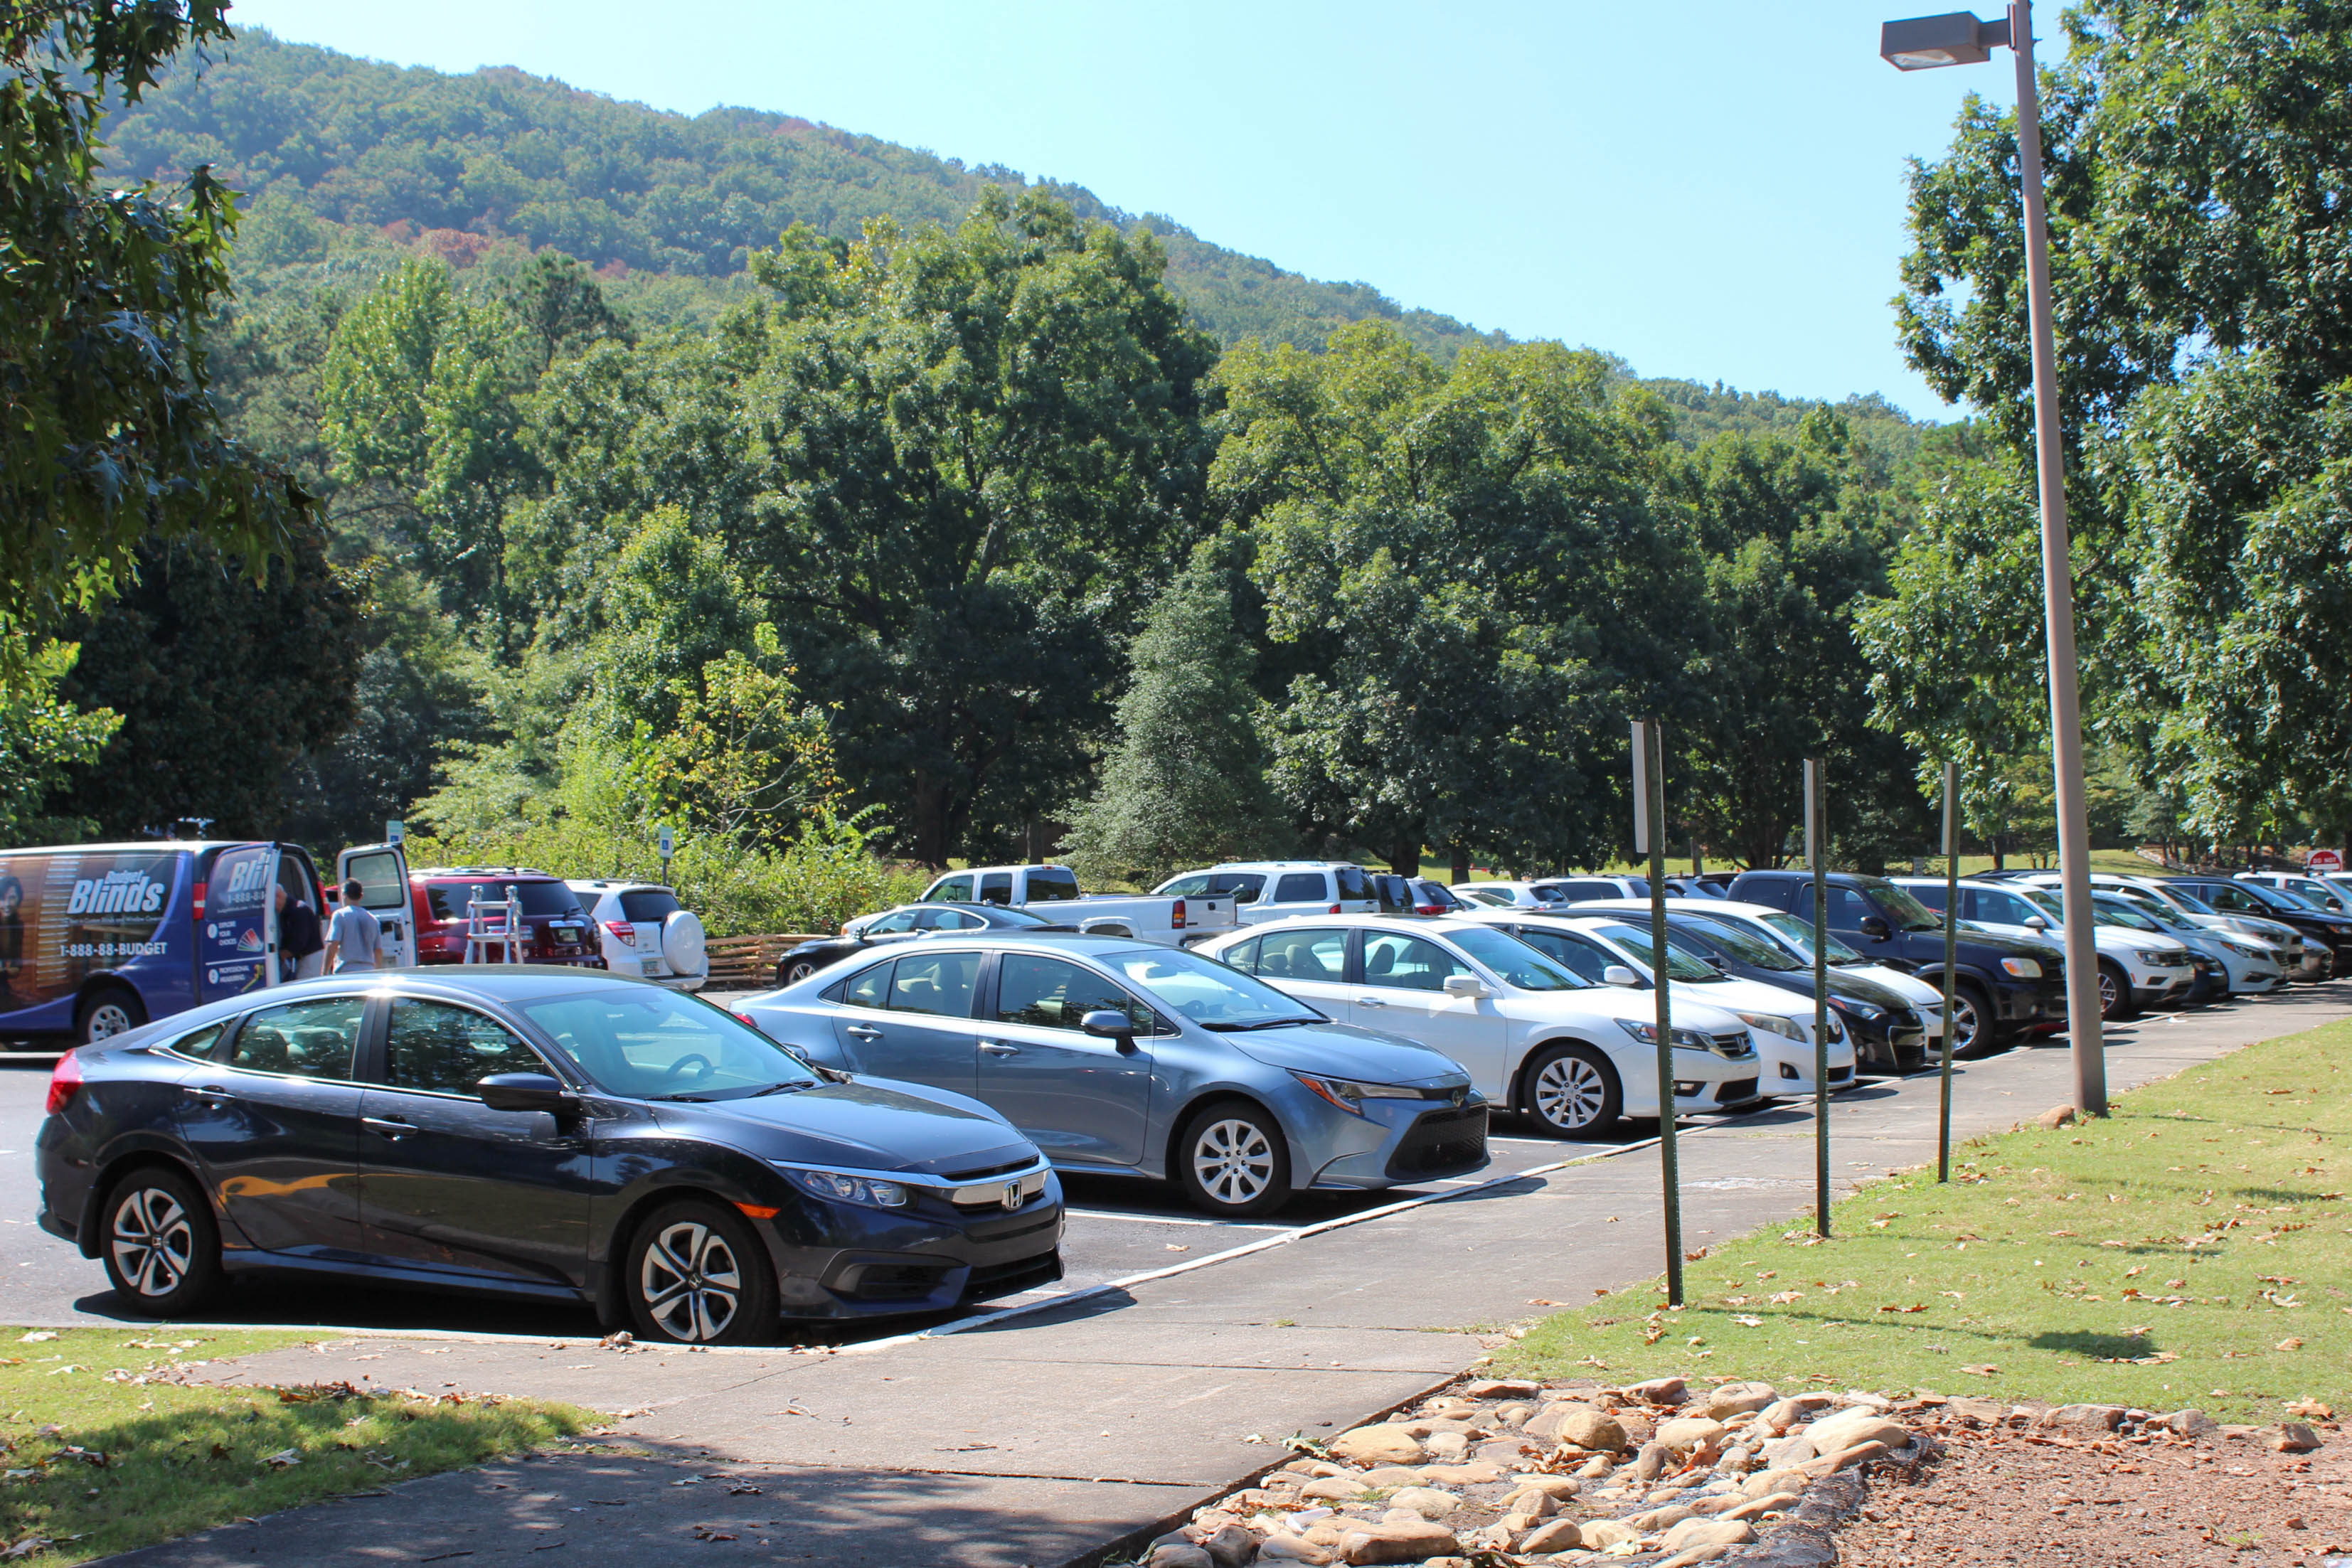 OPINION: Parking fees may help preserve Kennesaw Mountain